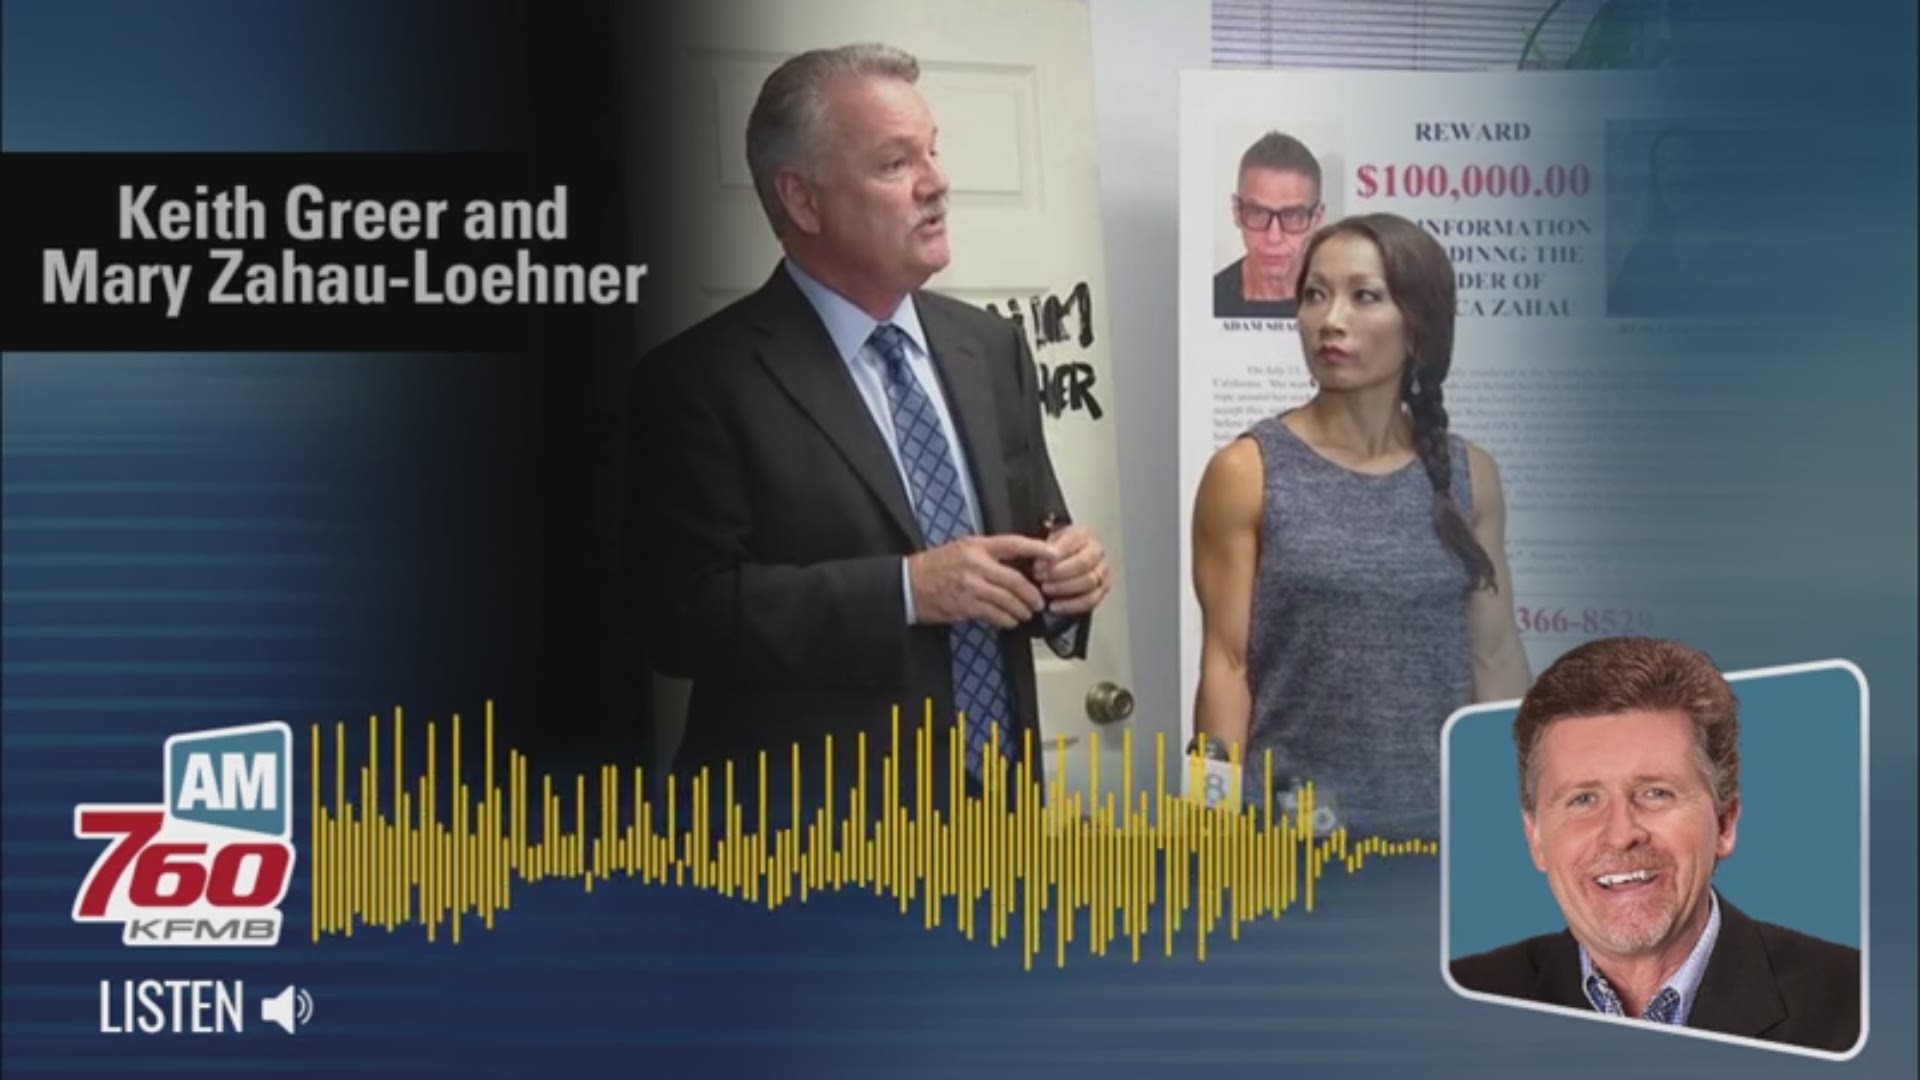 Mark Larson spoke with Mary Zahau-Loehner and Keith Greer about the reward being offered for information in the death of Rebecca Zahau